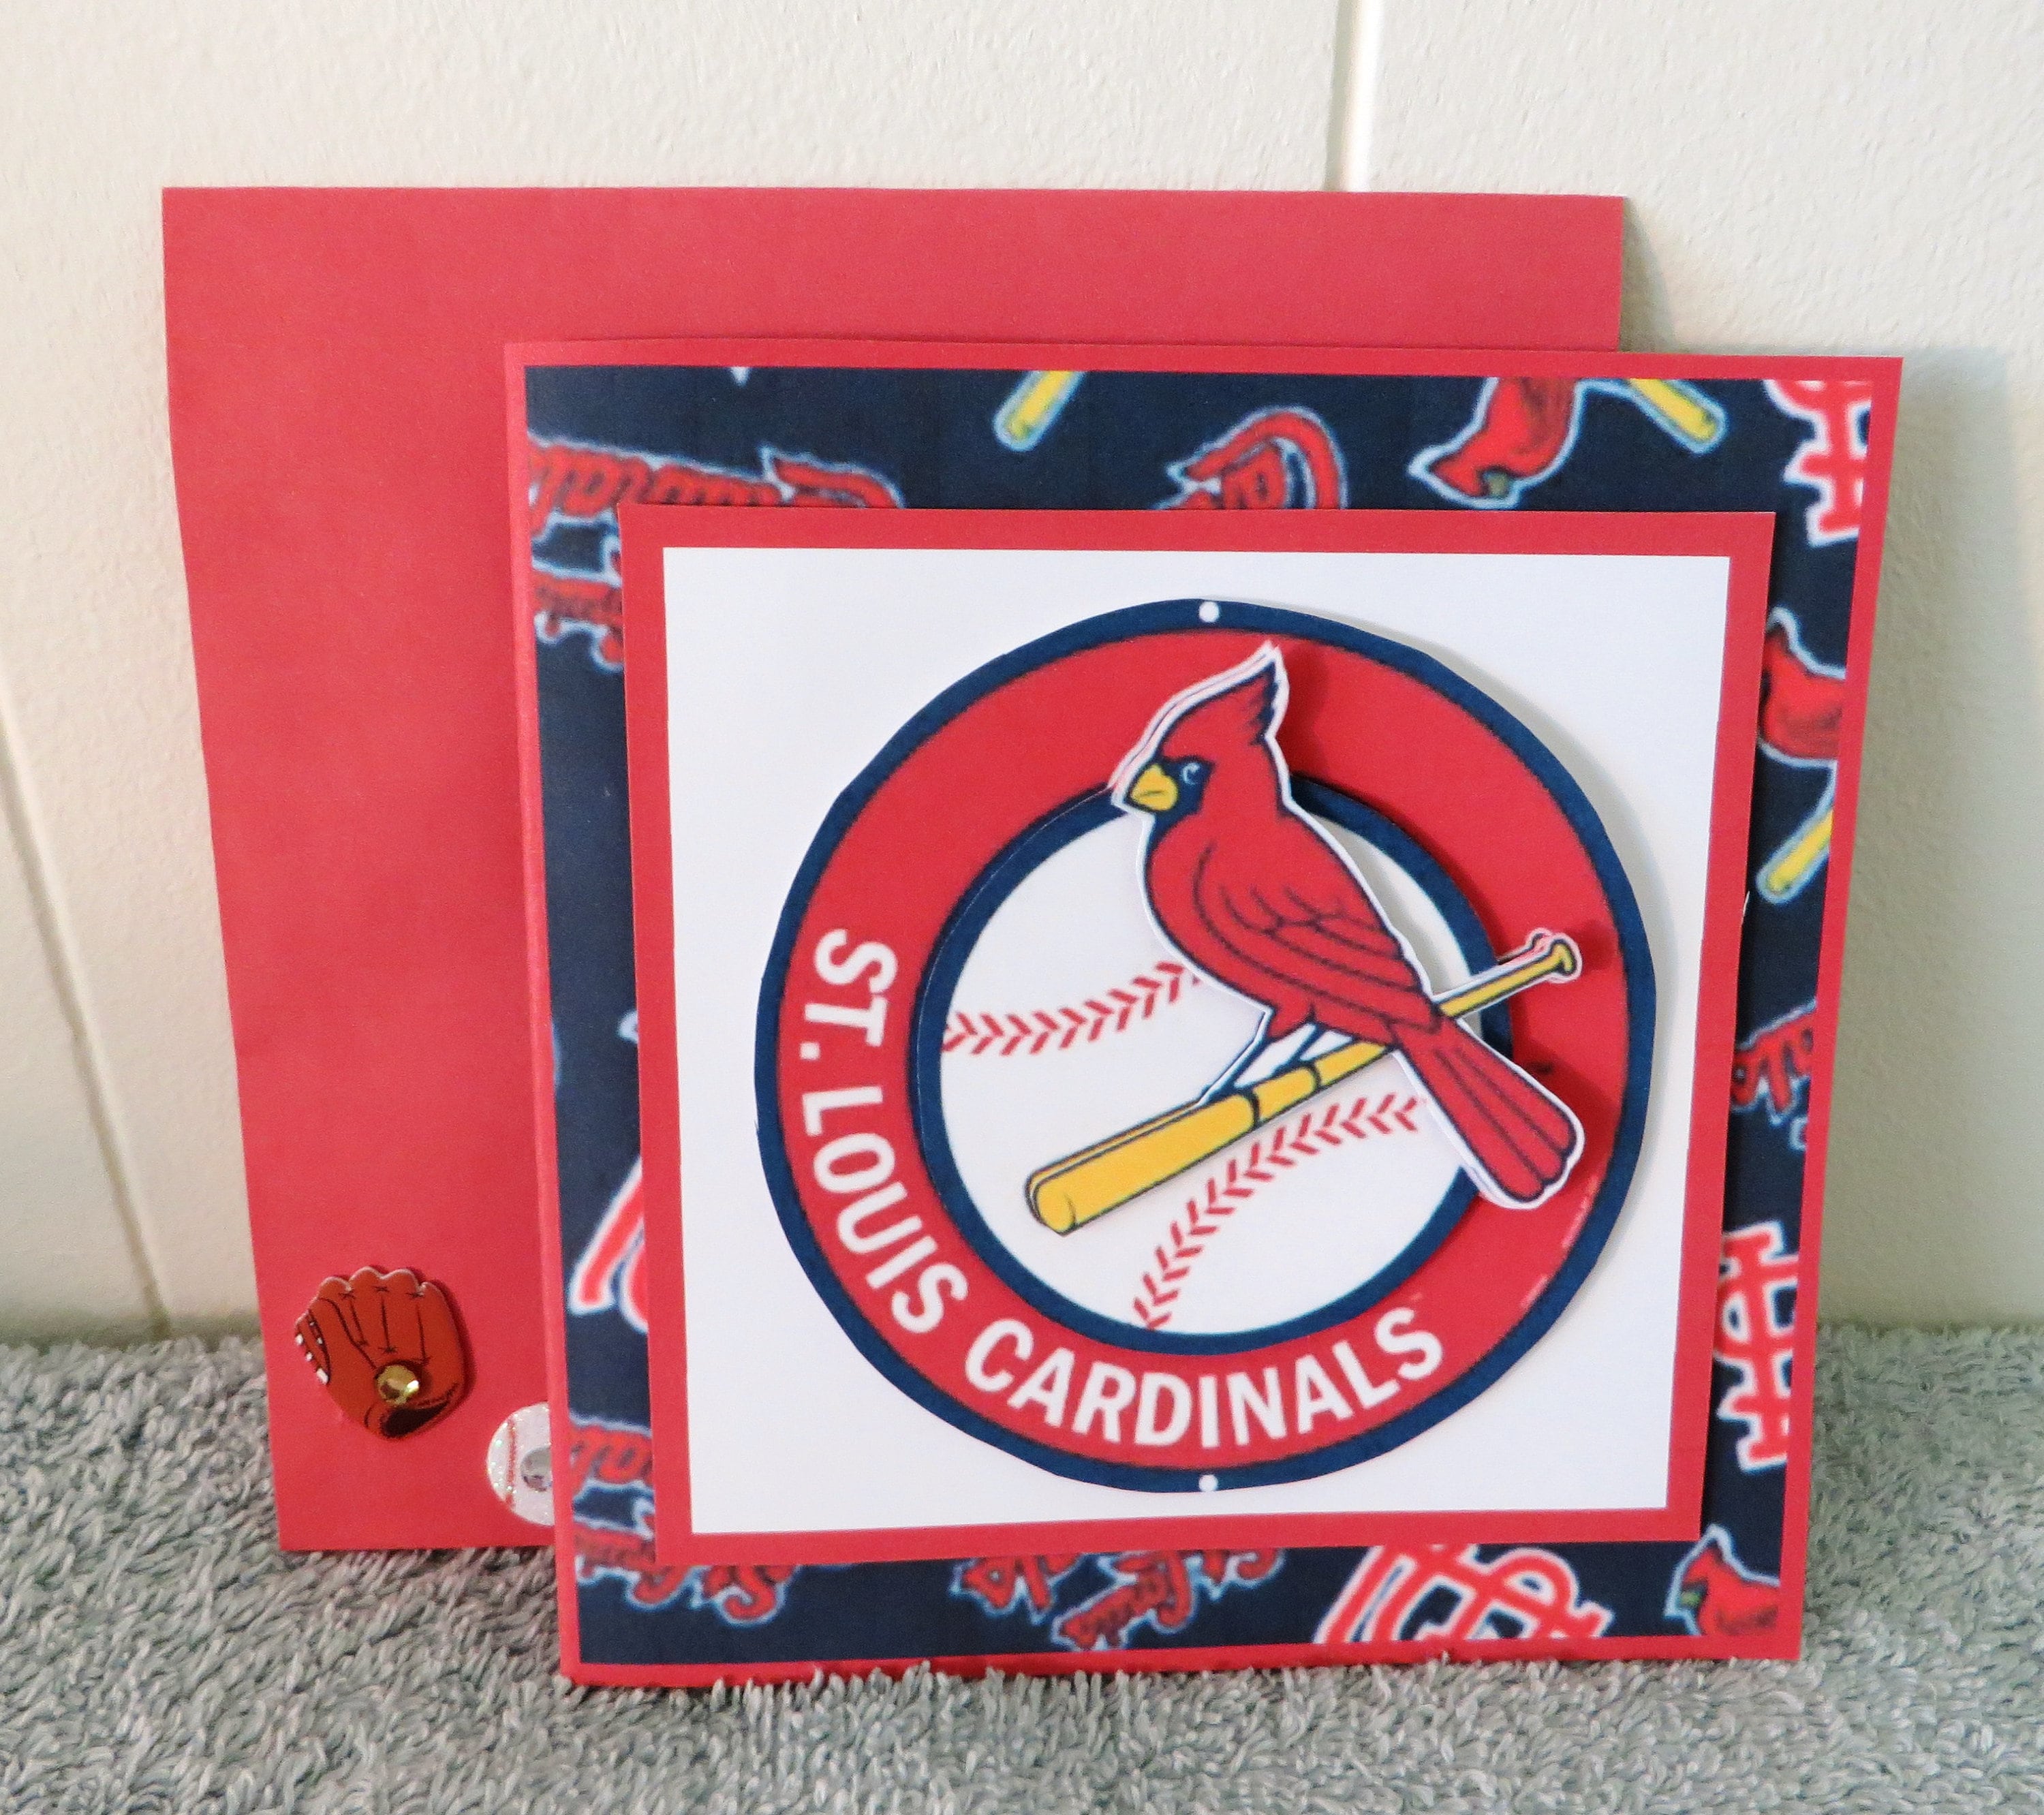 St. Louis Cardinals Buying Guide, Gifts, Holiday Shopping